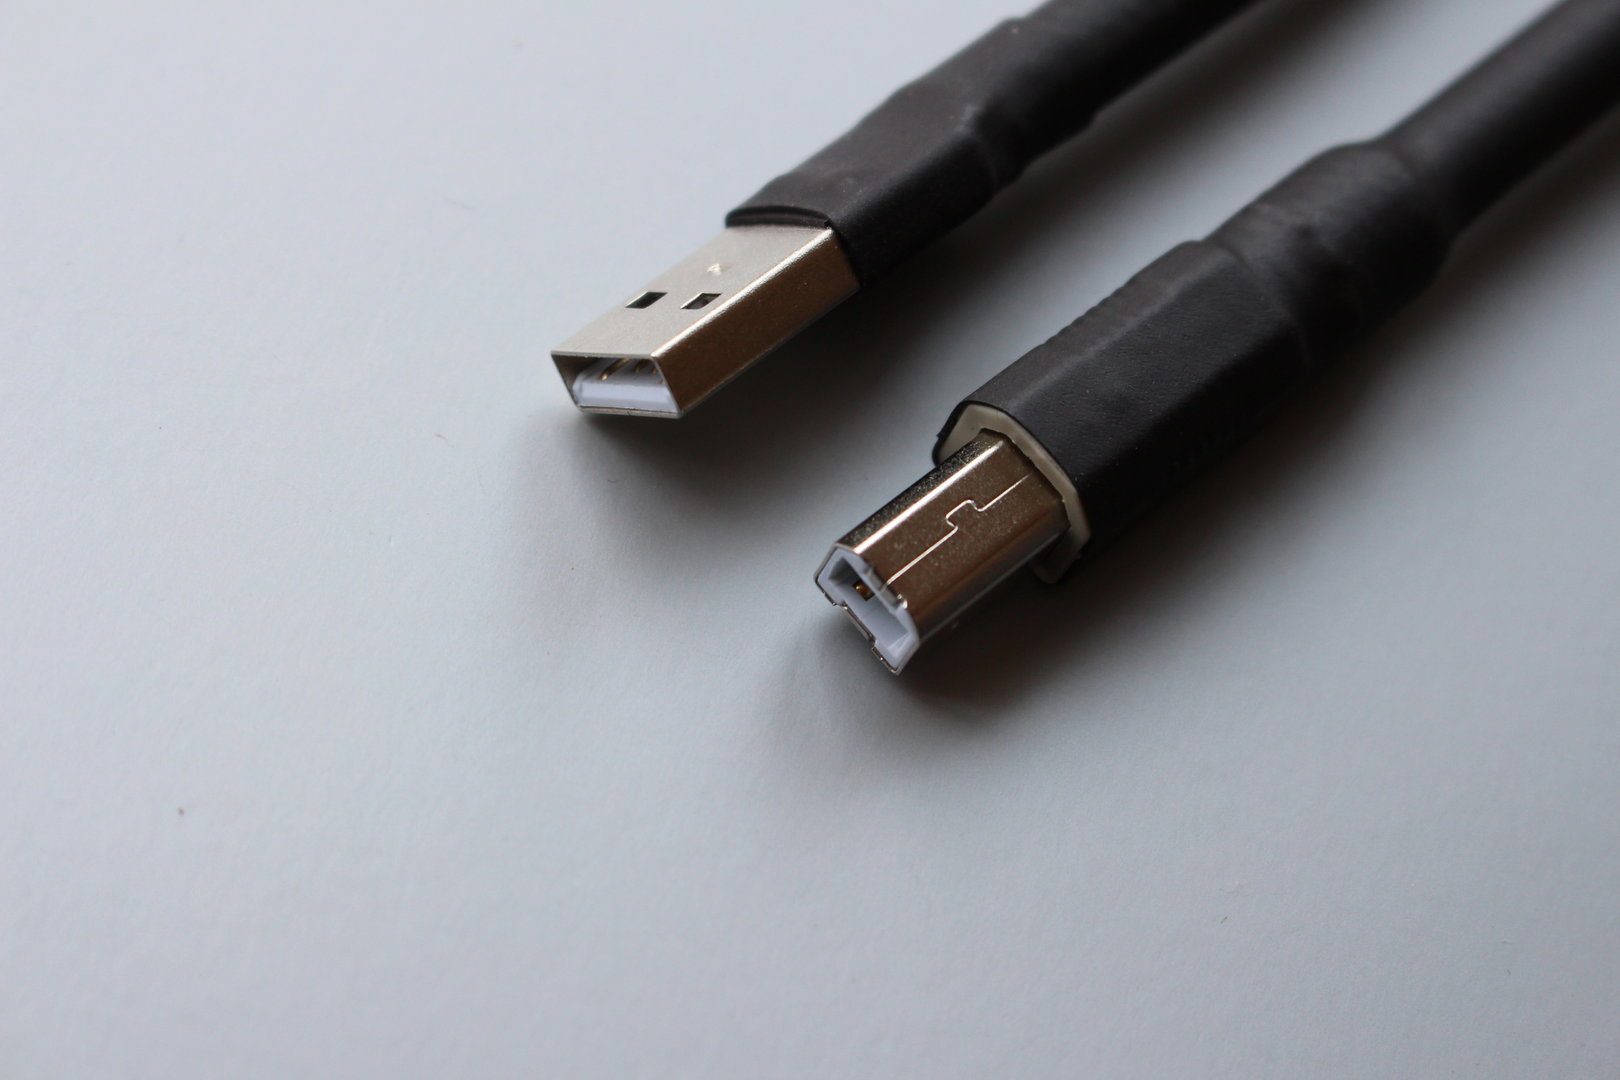 pure silver USB cable - separate lines for power